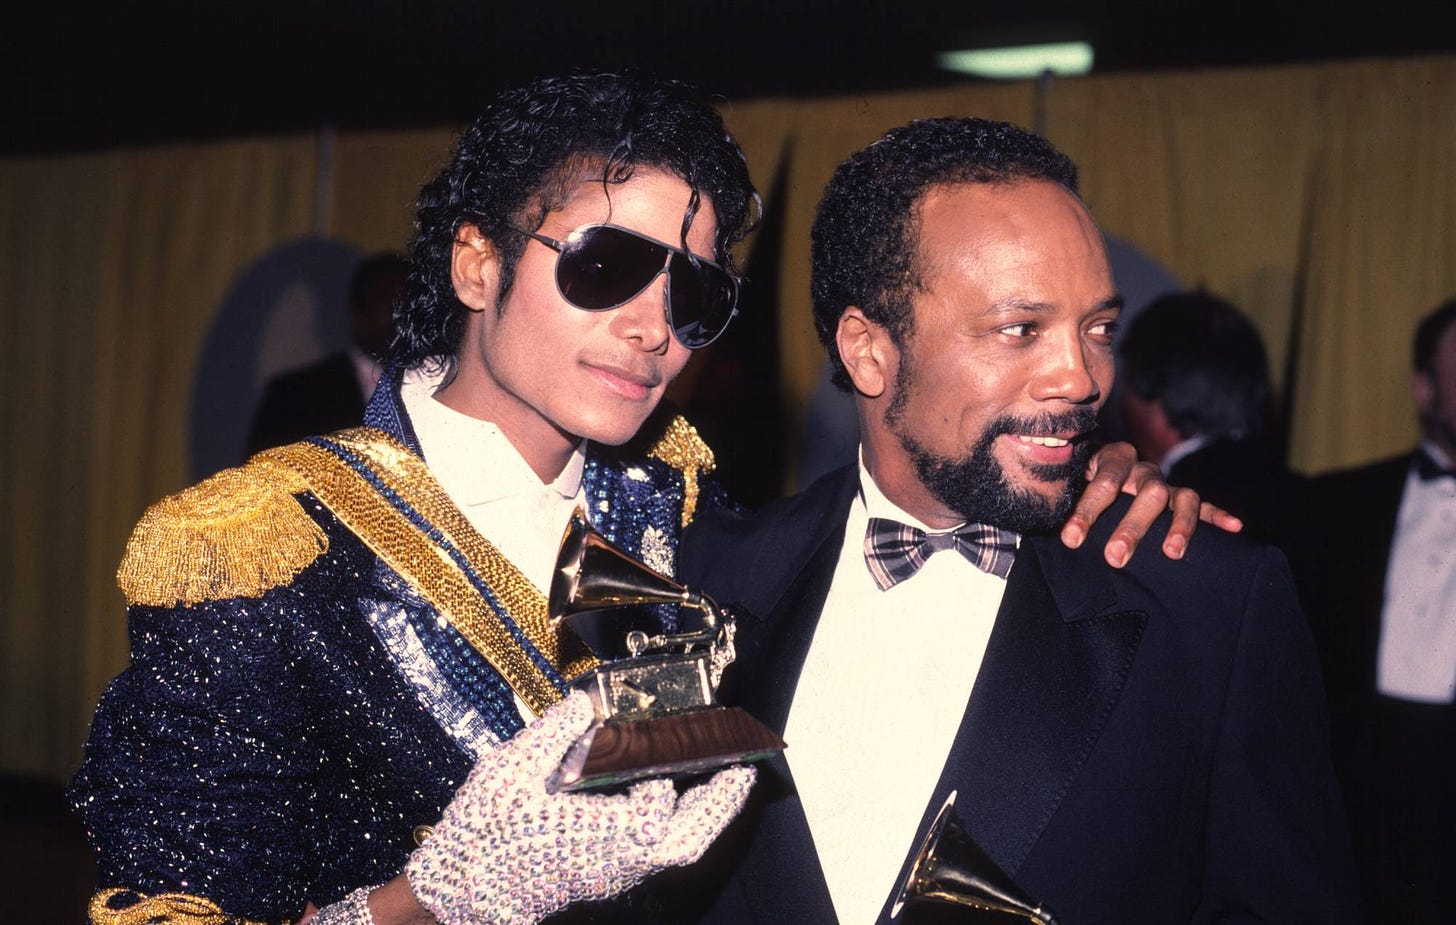 quincy jones and michael jackson at the grammys